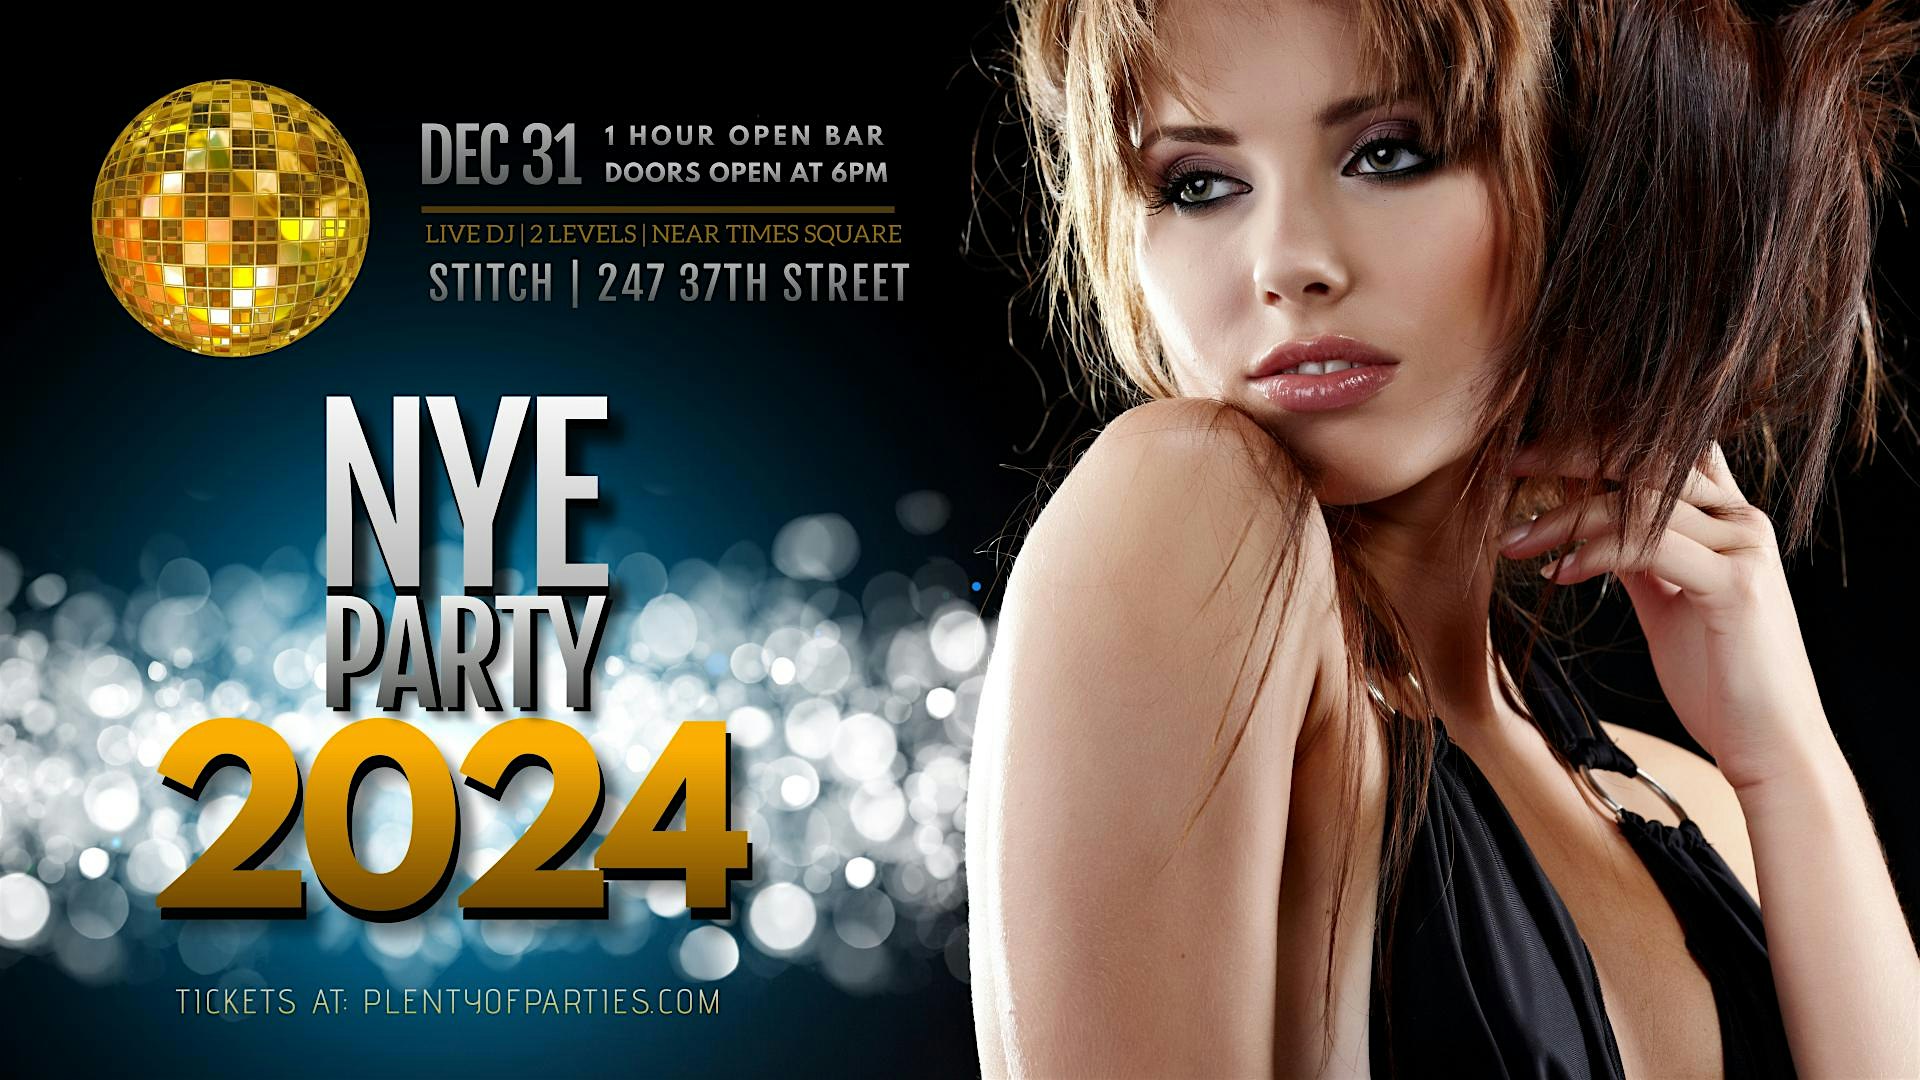 NYE 2024 @ Stitch NYC - NYC's Annual New Year's Eve Party